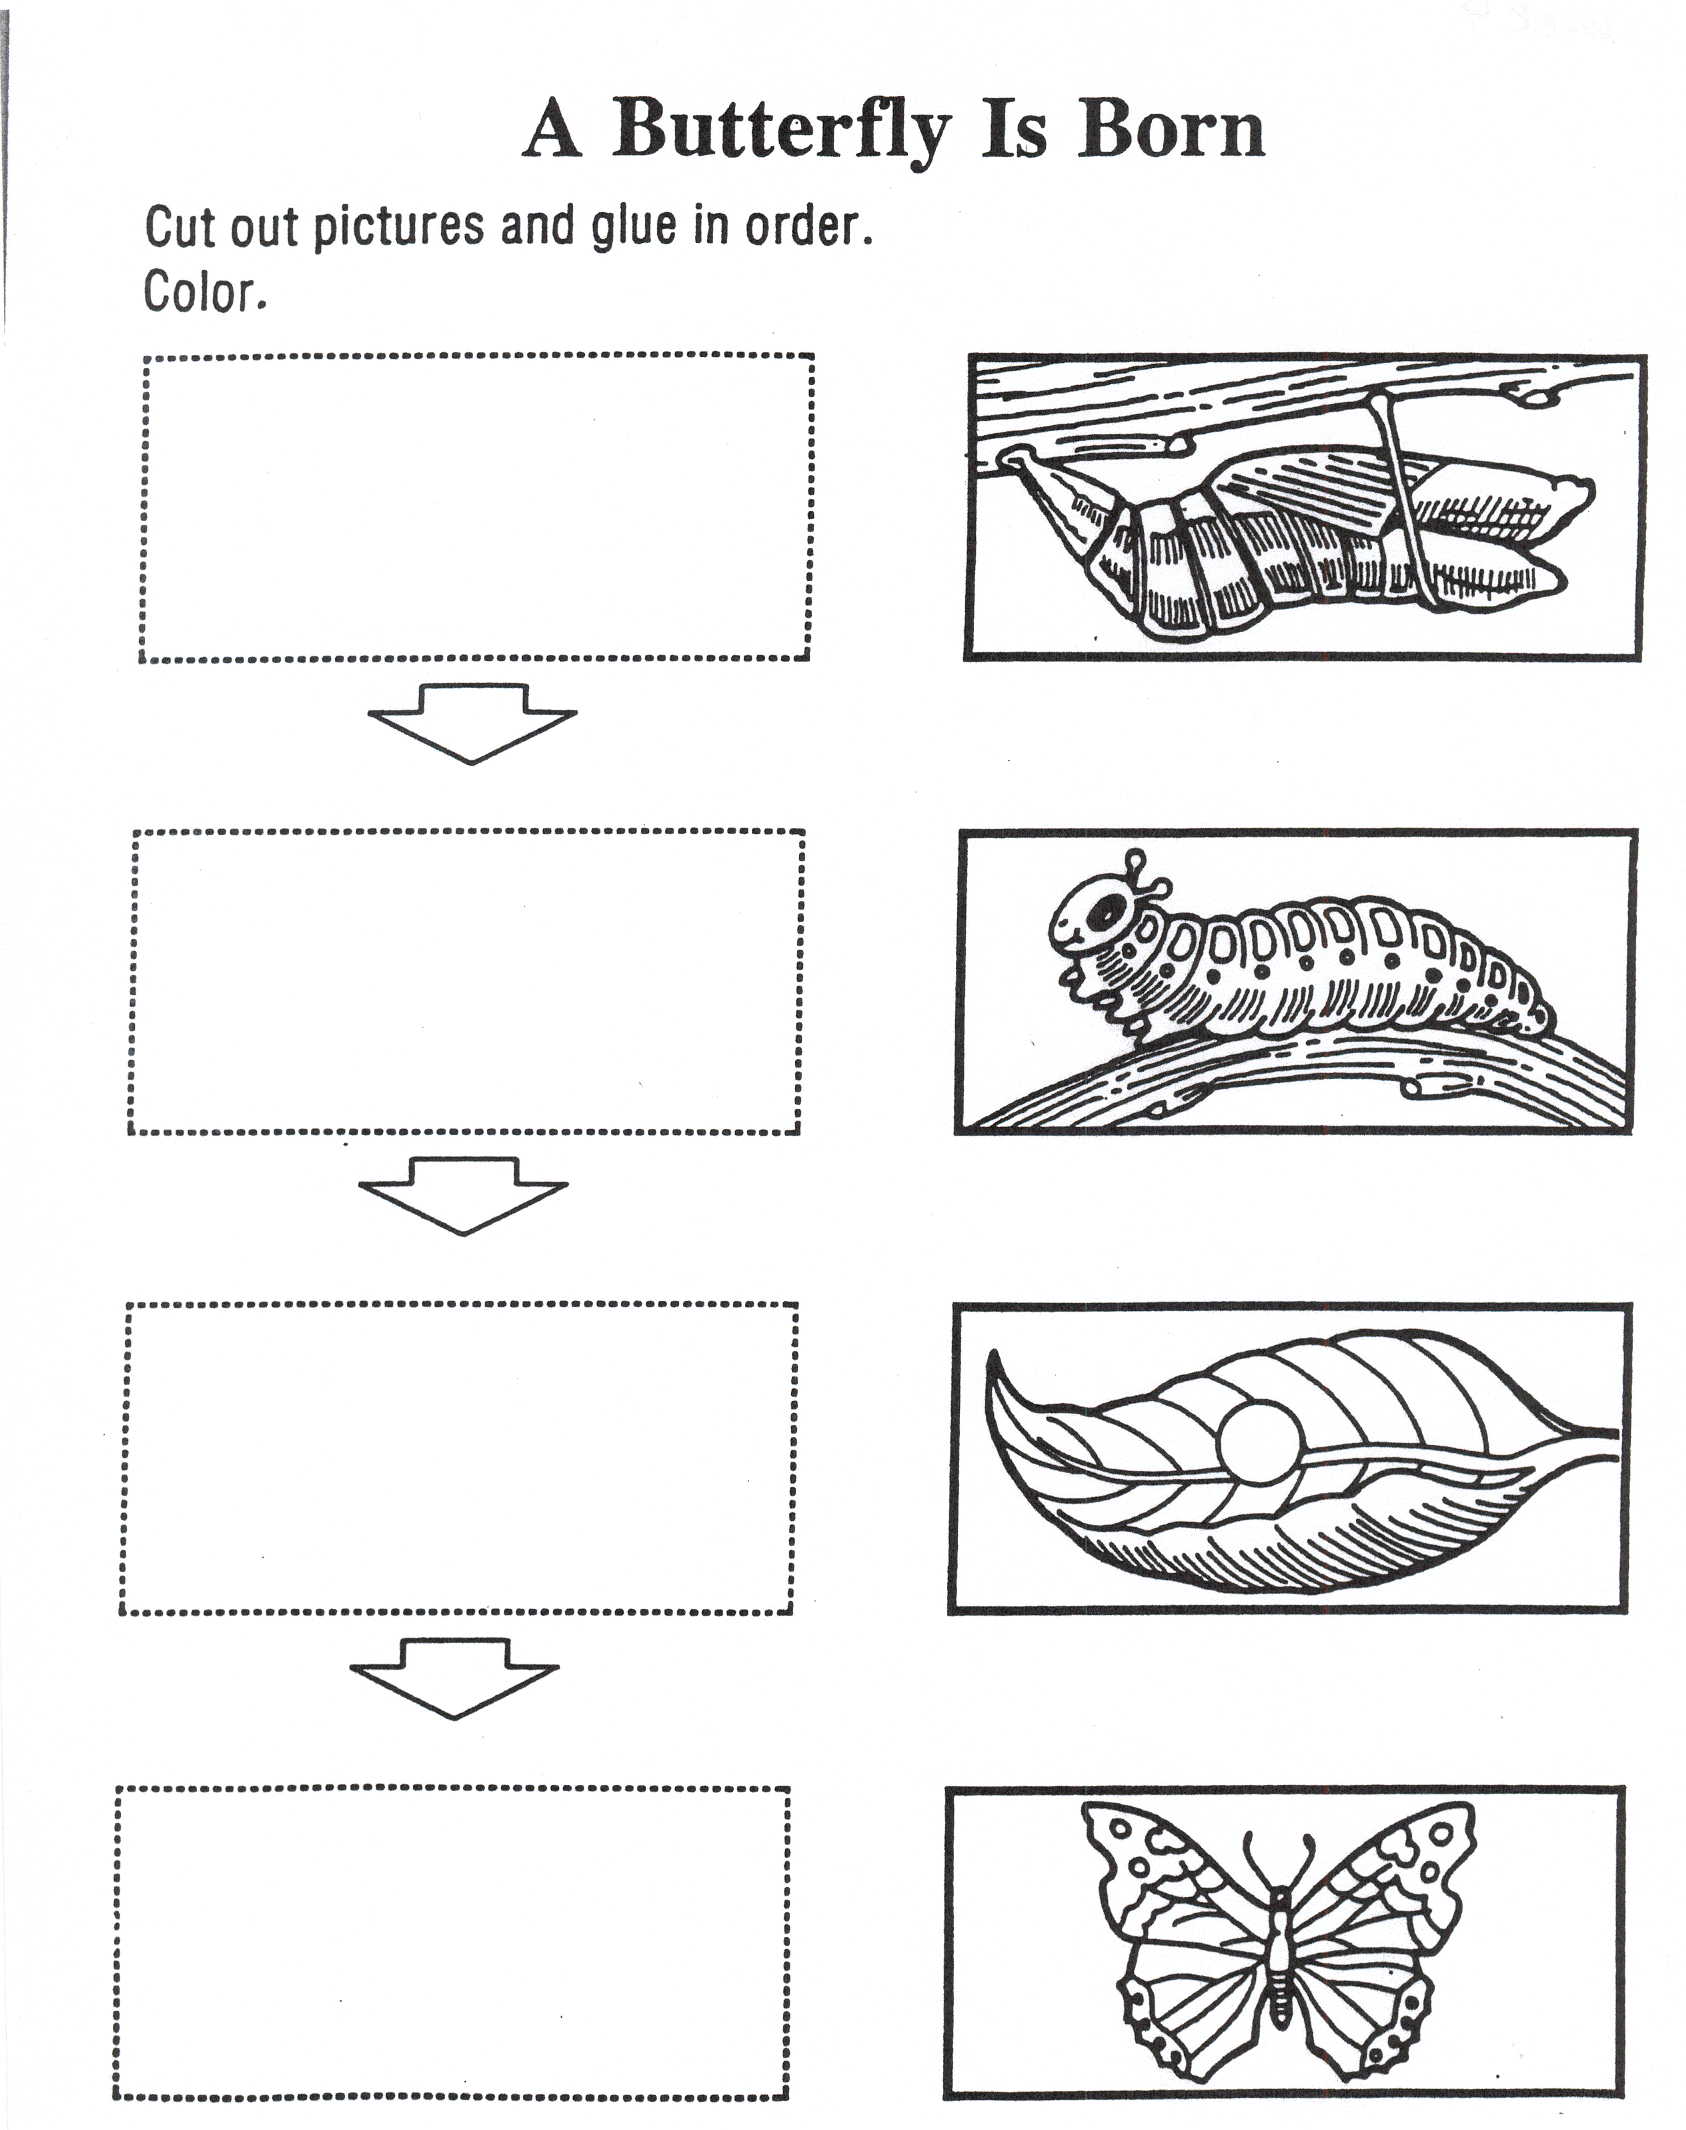 Butterfly life cycle coloring sheet